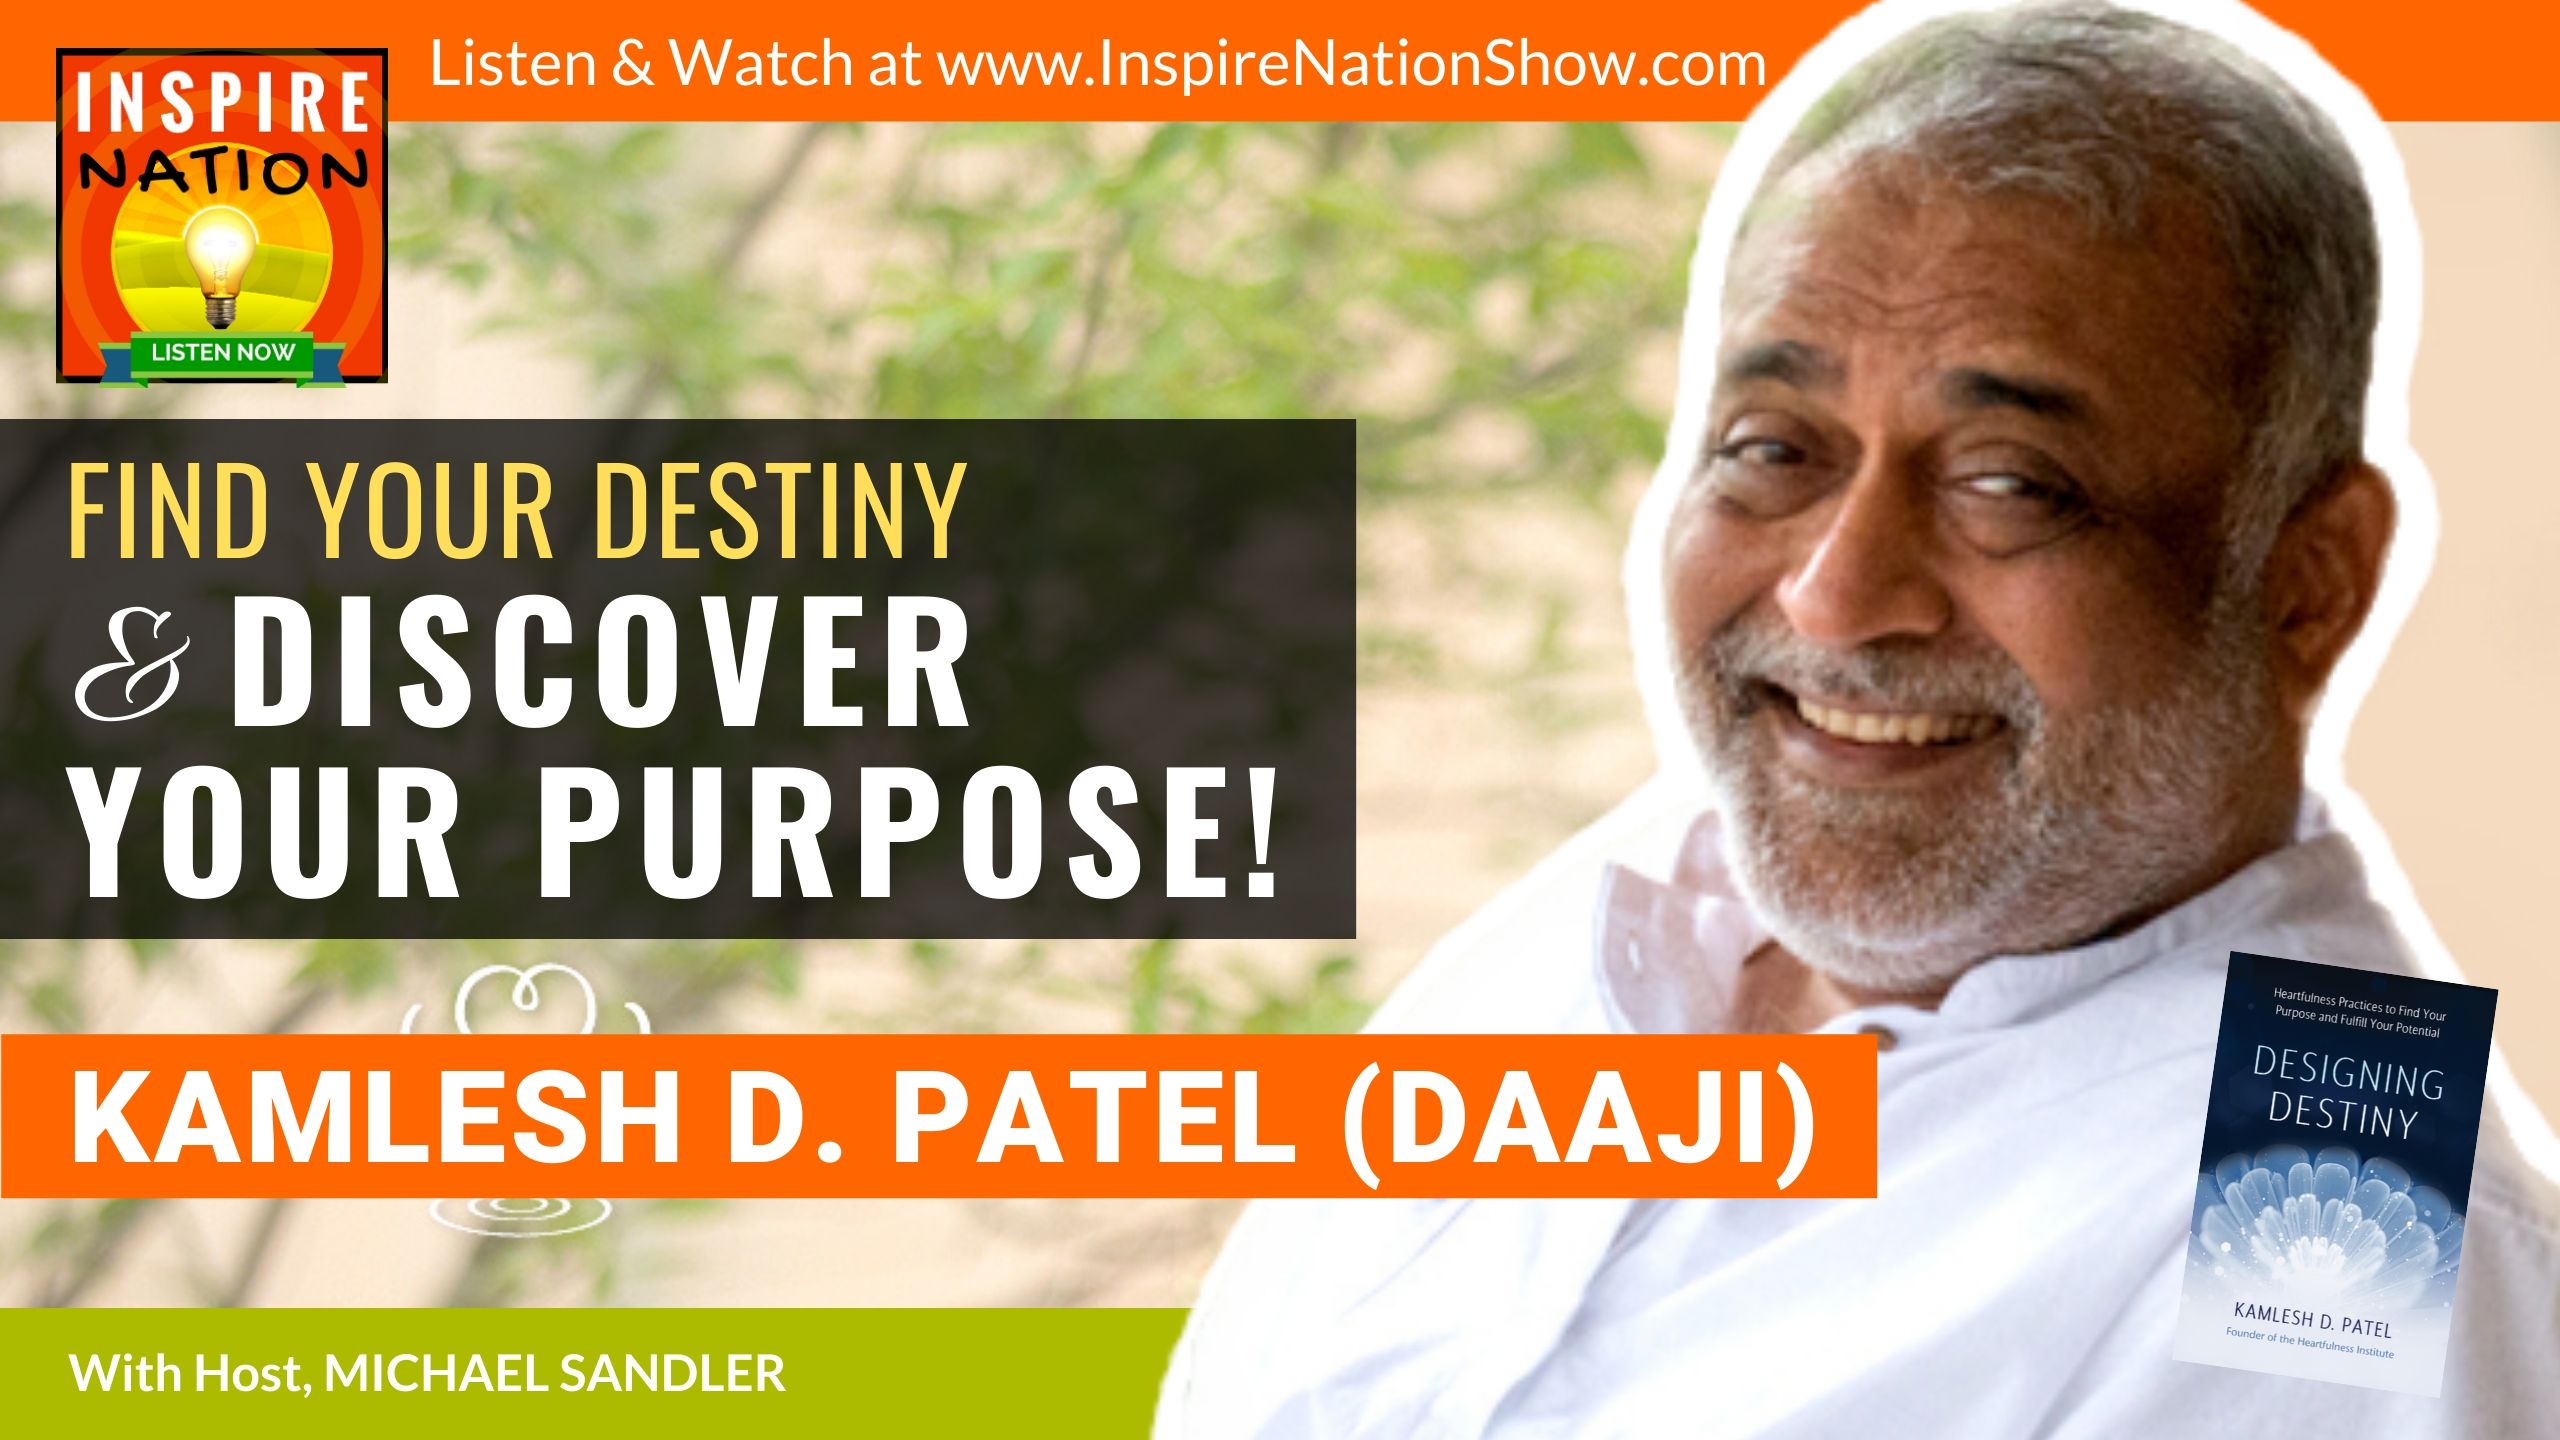 Michael Sandler interviews Kamlesh D Patel, aka Daaji on designing your destiny and discovering your life purpose!